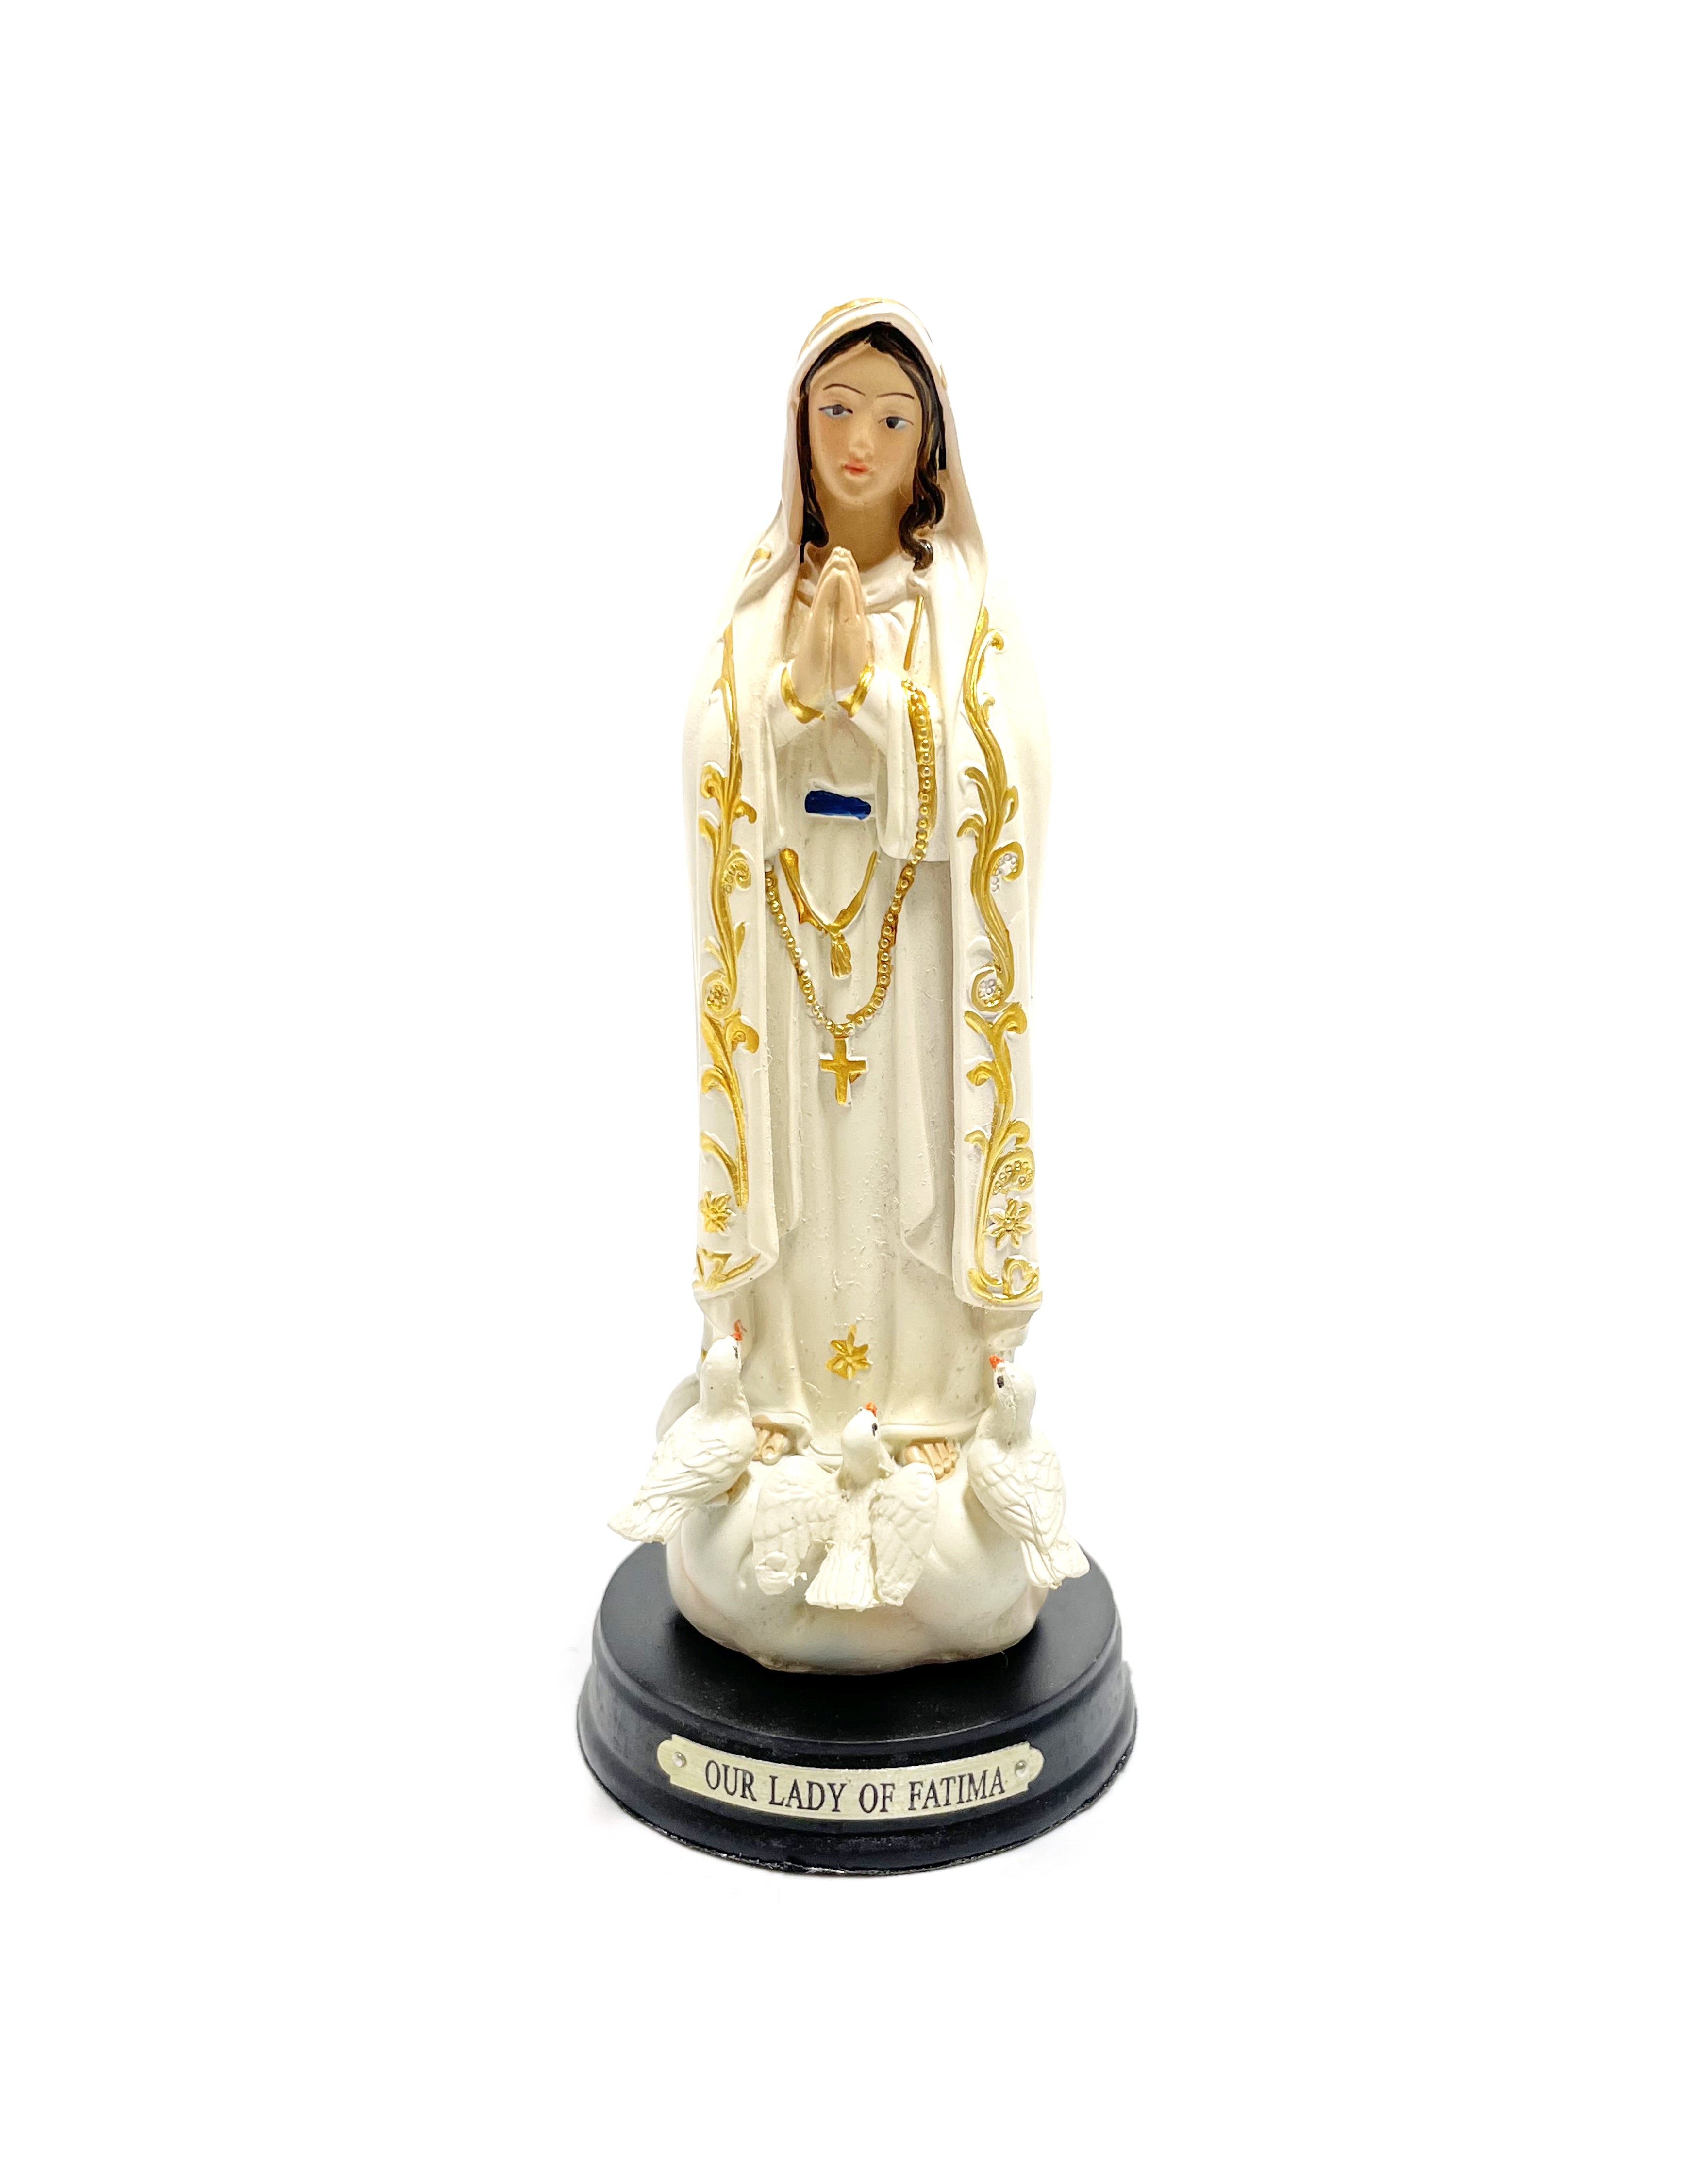 Religious statue of Our Lady of Fatima 5" height